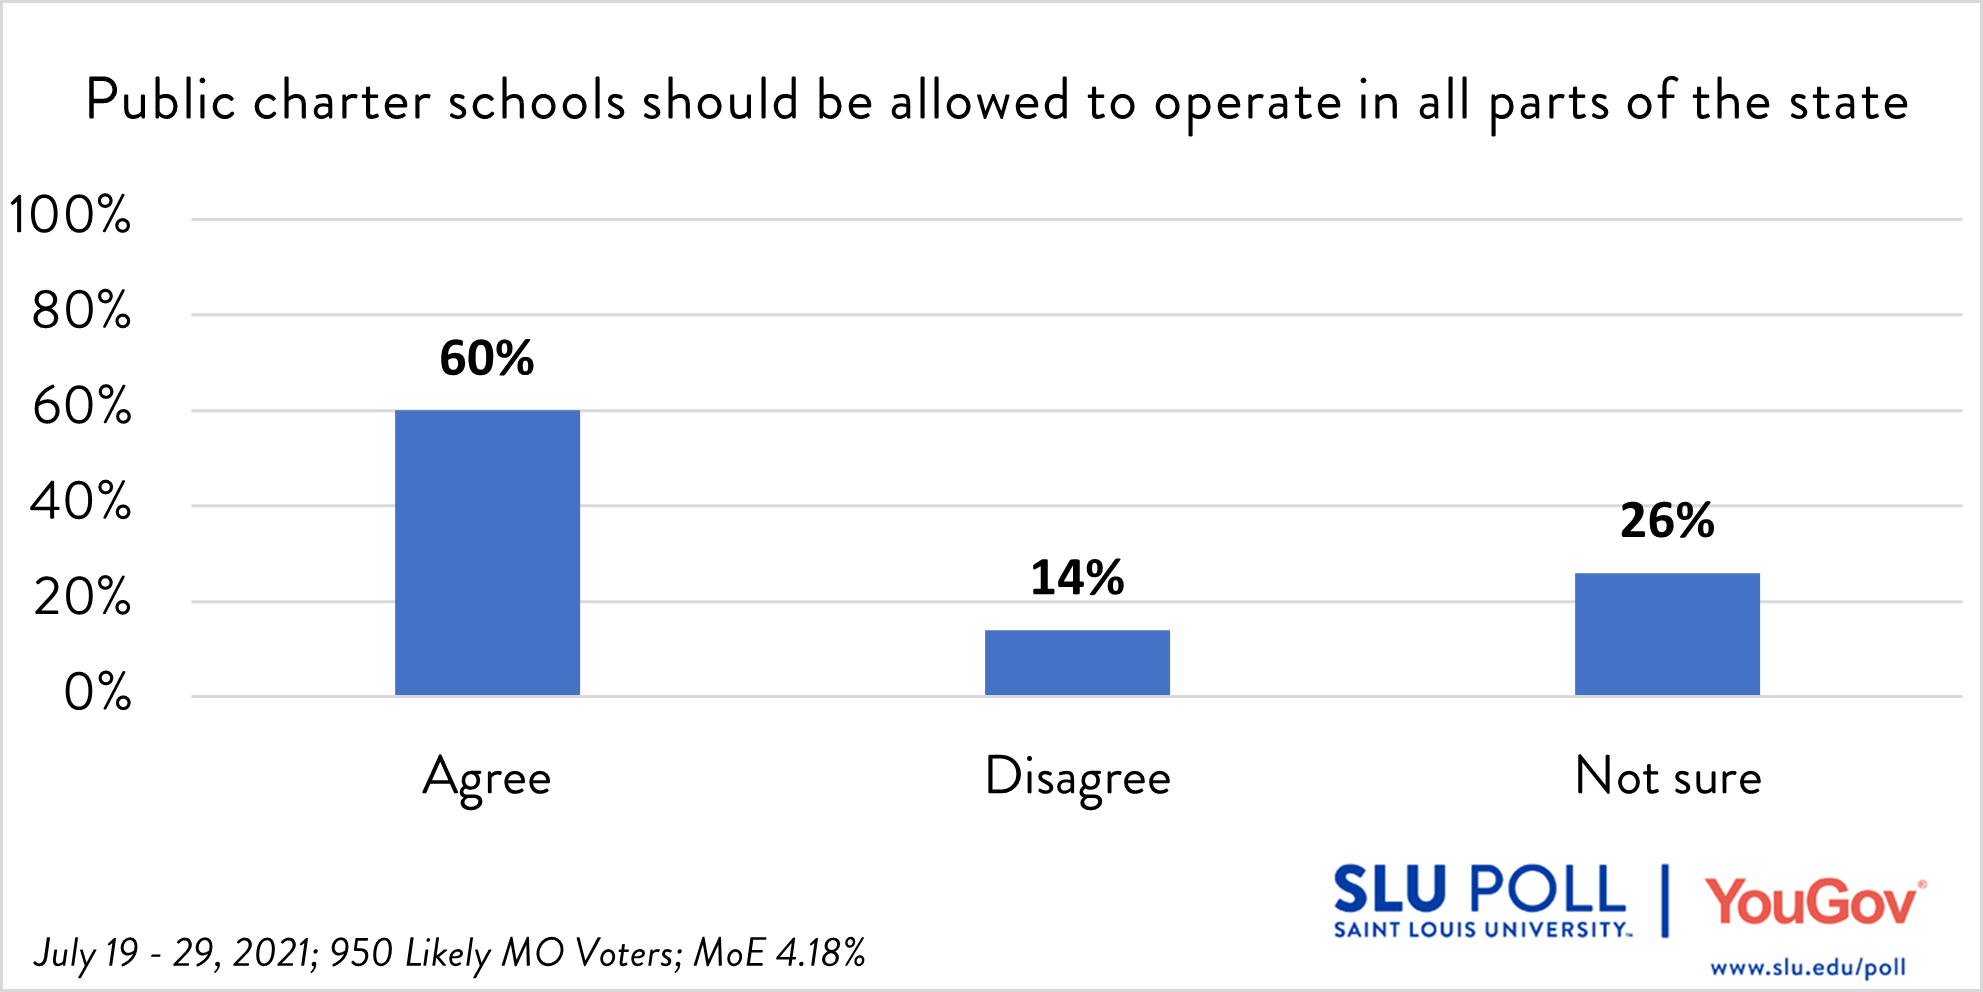 Do you agree or disagree with the following statements…Public charter schools should be allowed to operate in all parts of the state? - Agree: 60% - Disagree: 14% - Not sure: 26%